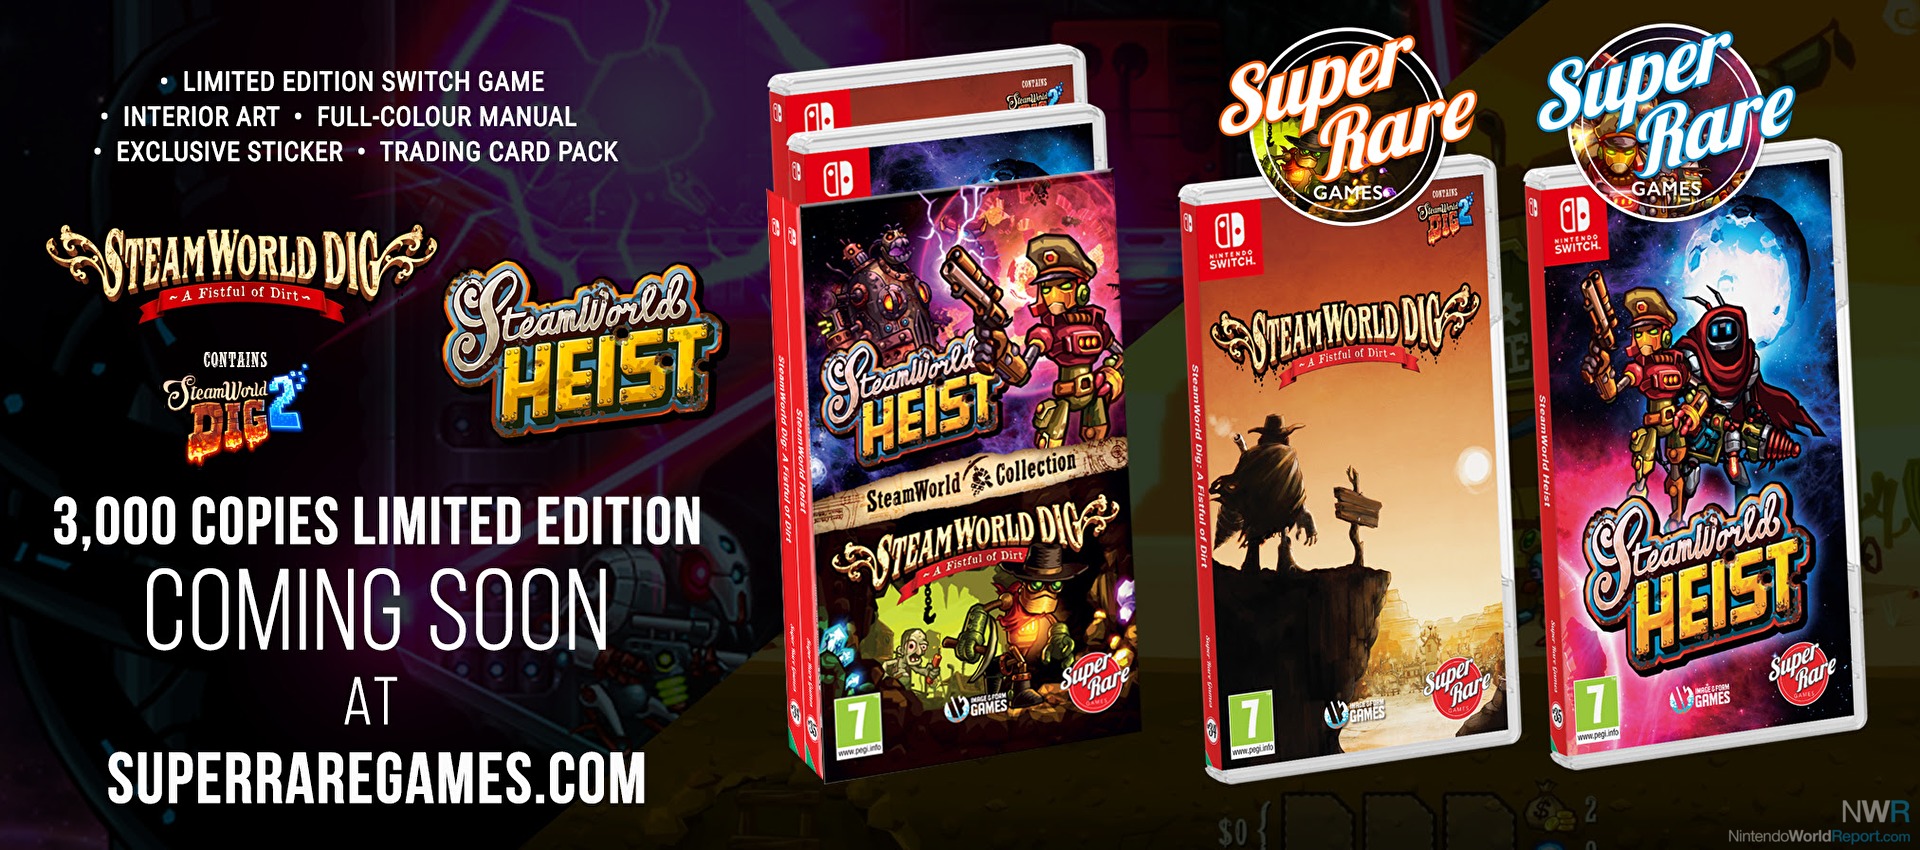 SteamWorld Dig & SteamWorld Heist to Receive Limited Physical Editions For Nintendo  Switch - News - Nintendo World Report